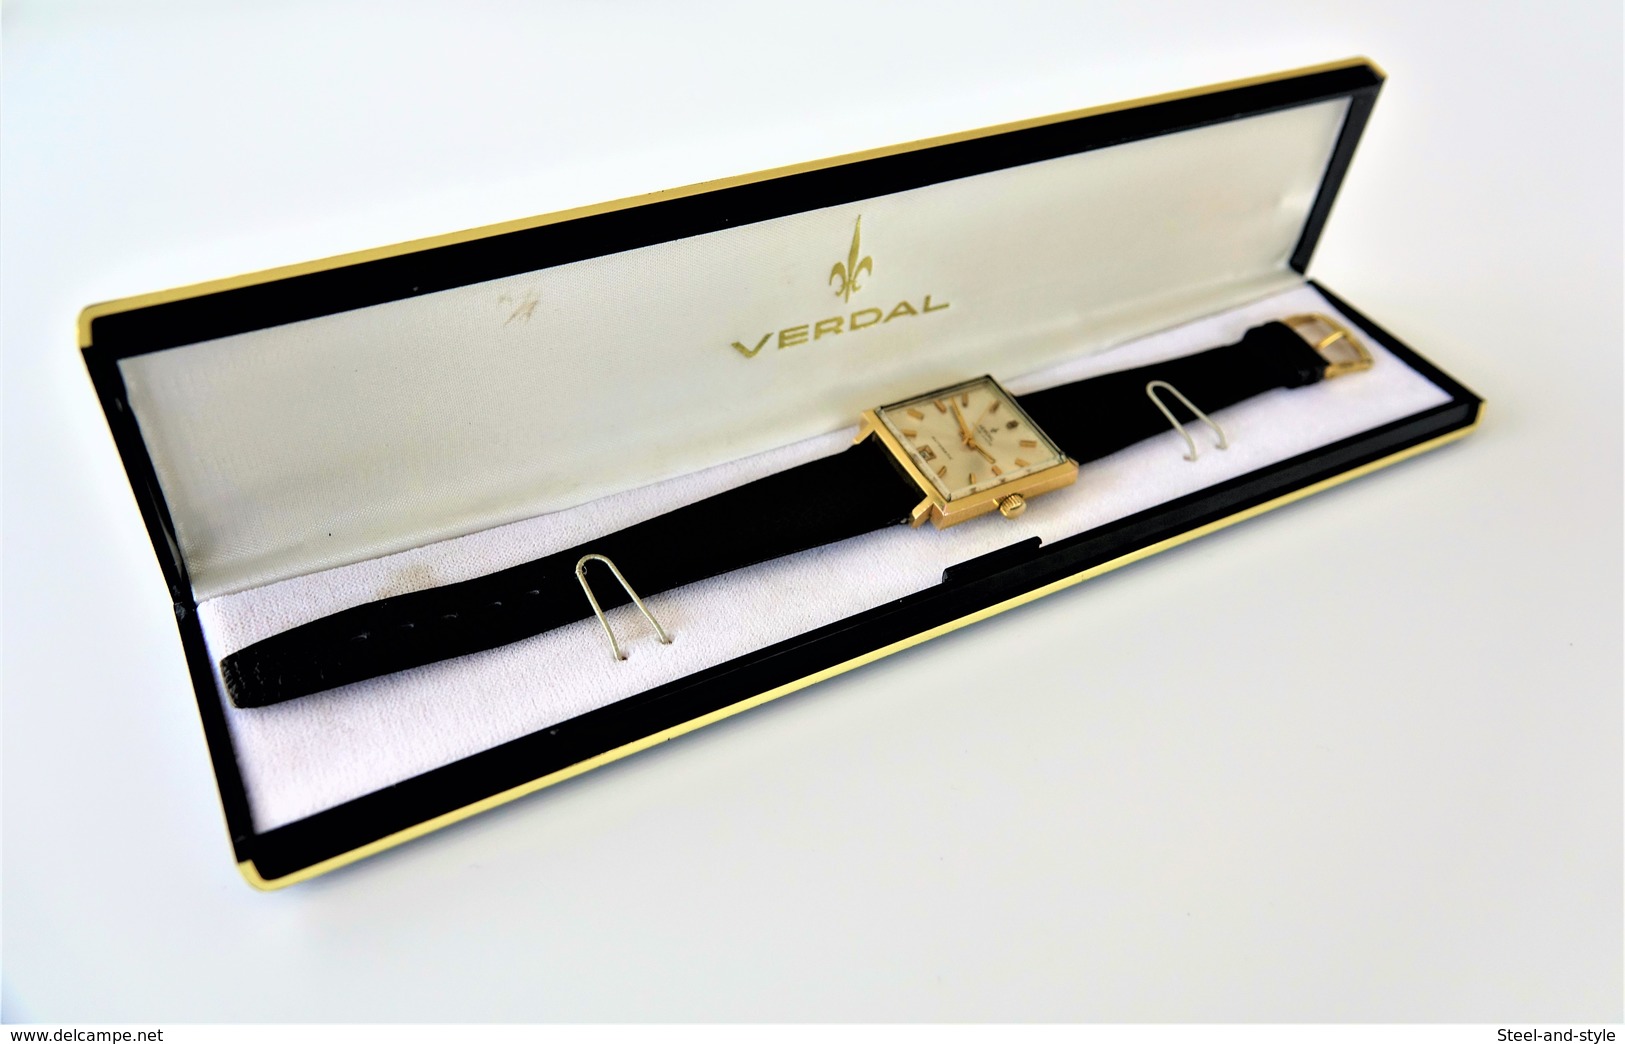 Watches : VERDAL TIME-DATE AUTOMATIC RaRe With Original Box - 20 Microns Gold Plated - Original - Running - 1970s - Horloge: Luxe